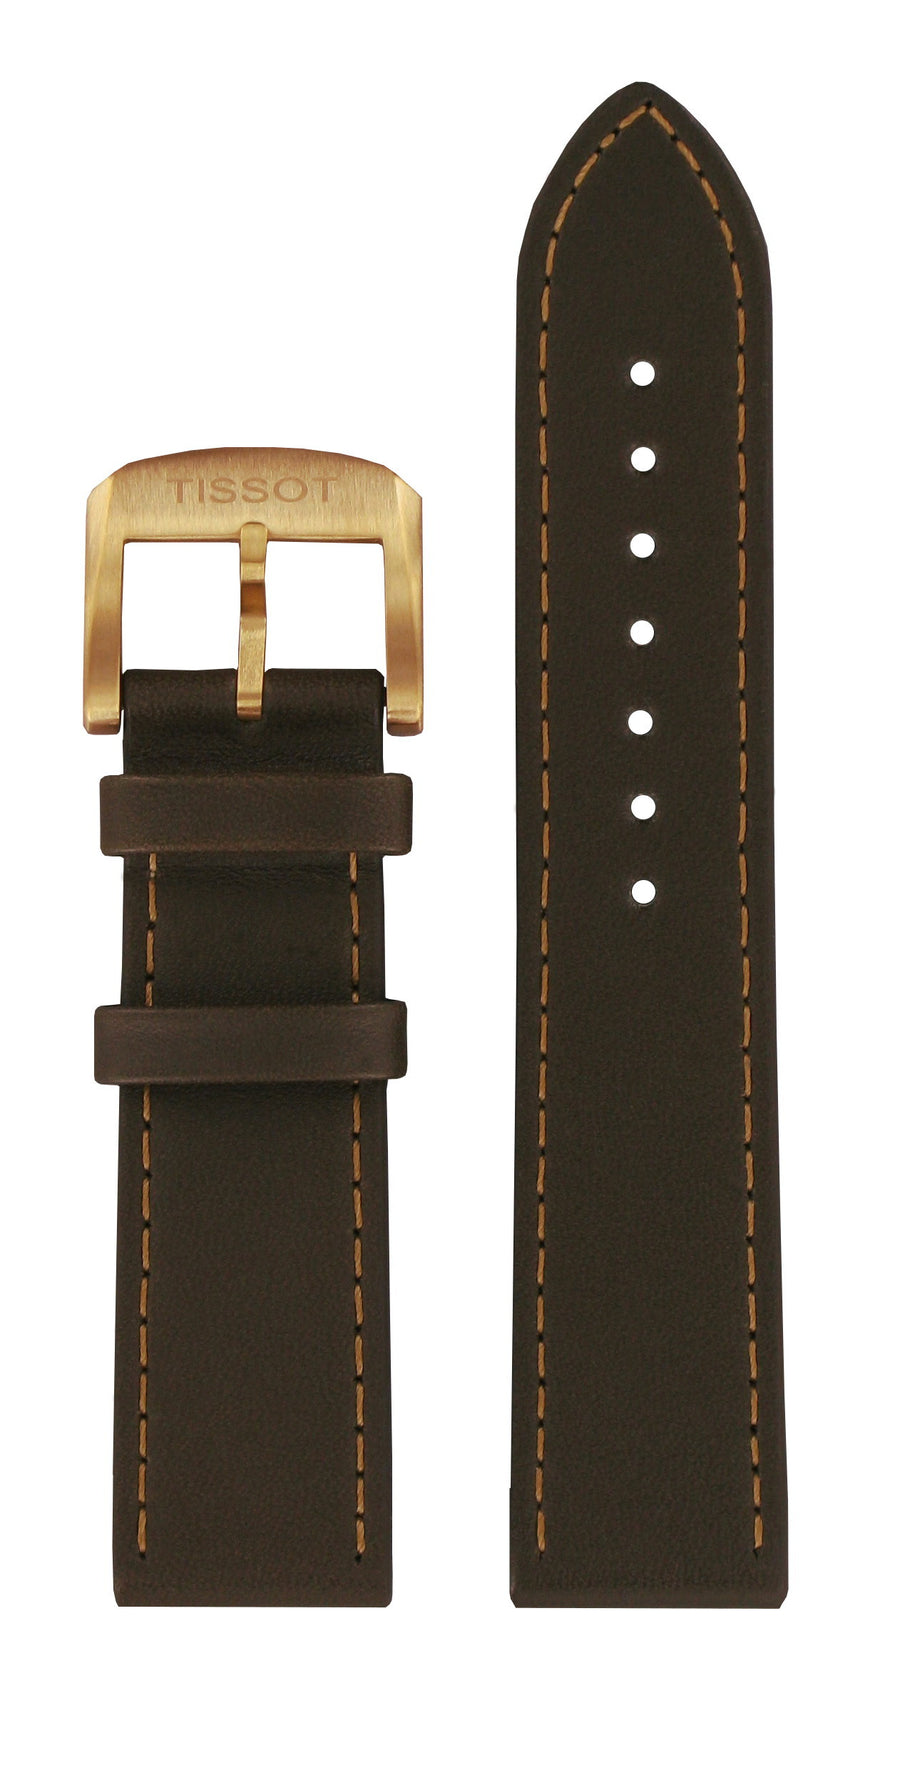 Tissot 19mm (Longer Size) Brown Leather Strap Watch Band - WATCHBAND EXPERT